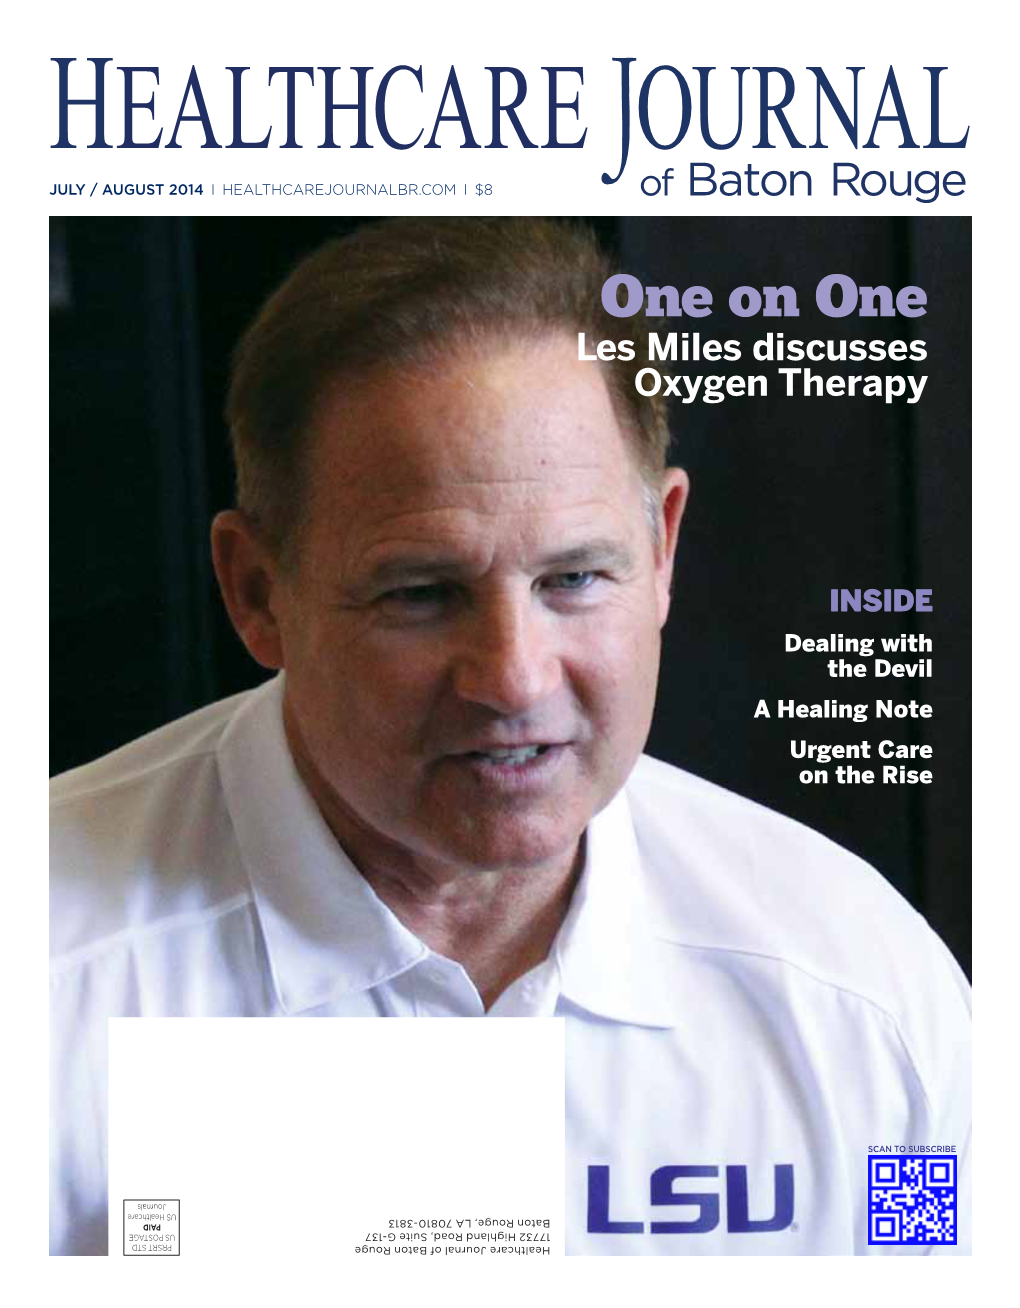 One on One Les Miles Discusses Oxygen Therapy